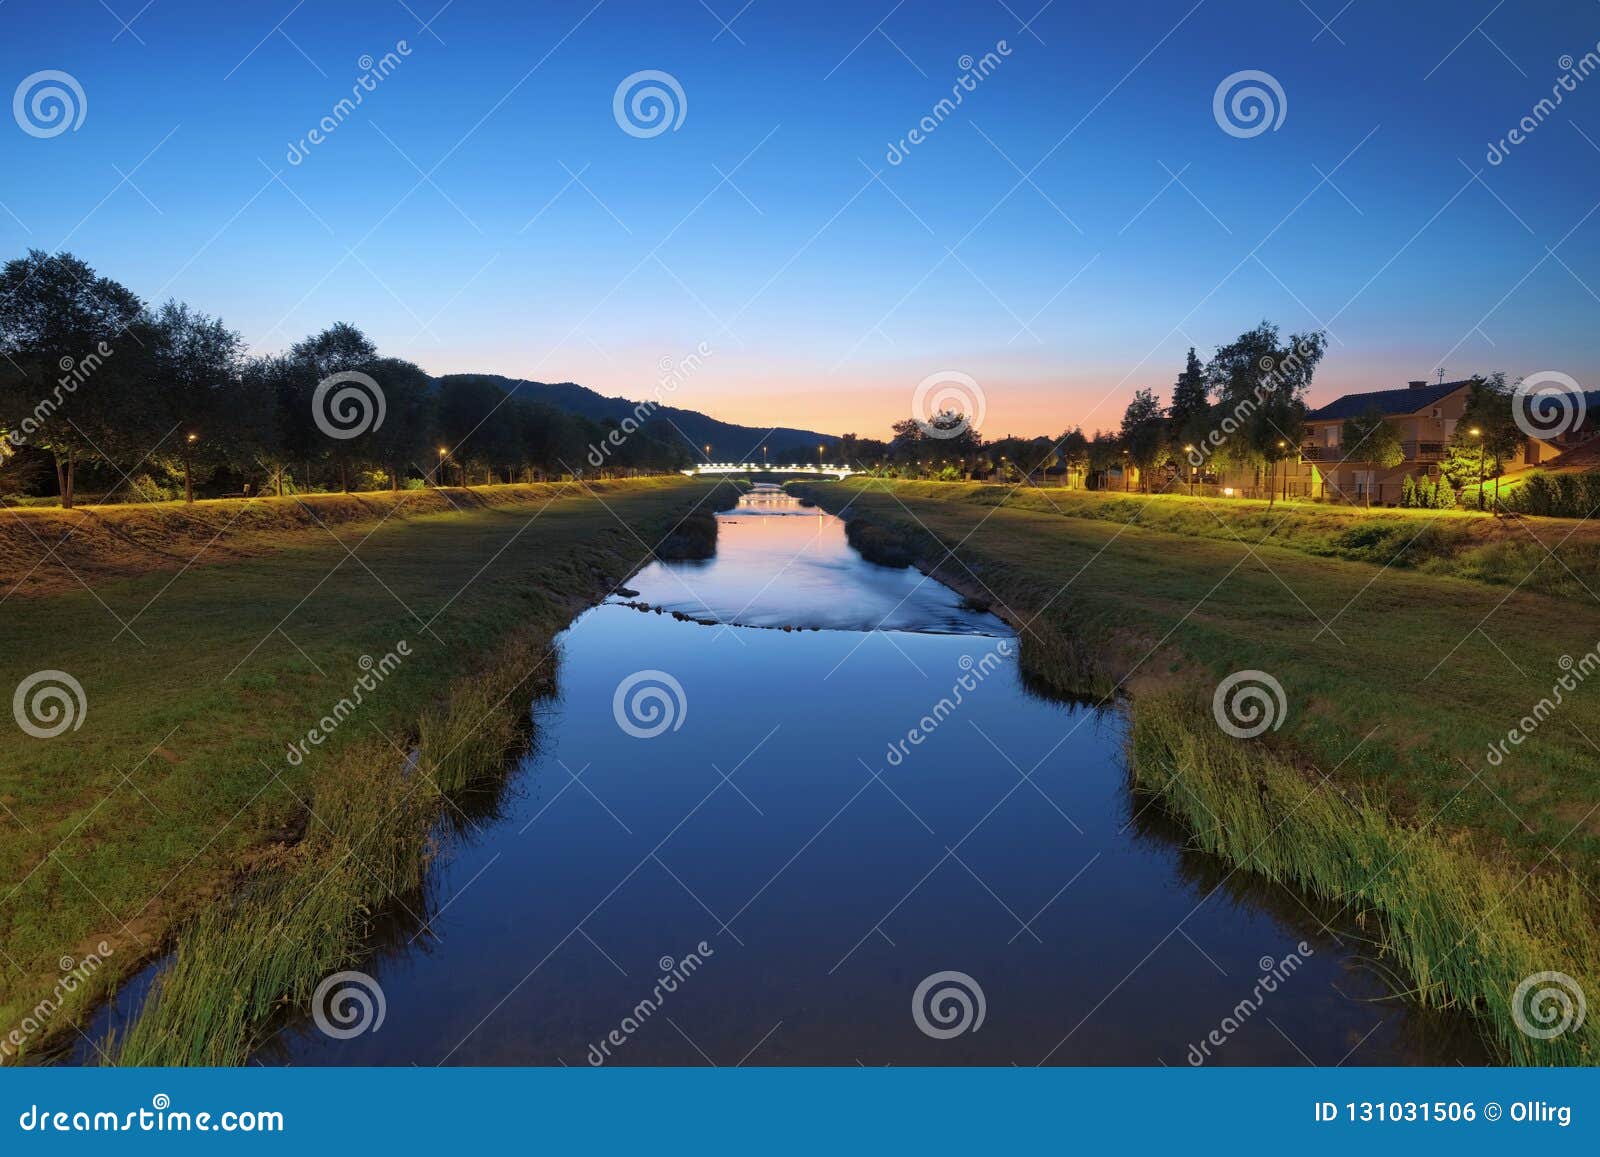 nisava river at twilight in pirot town, serbia